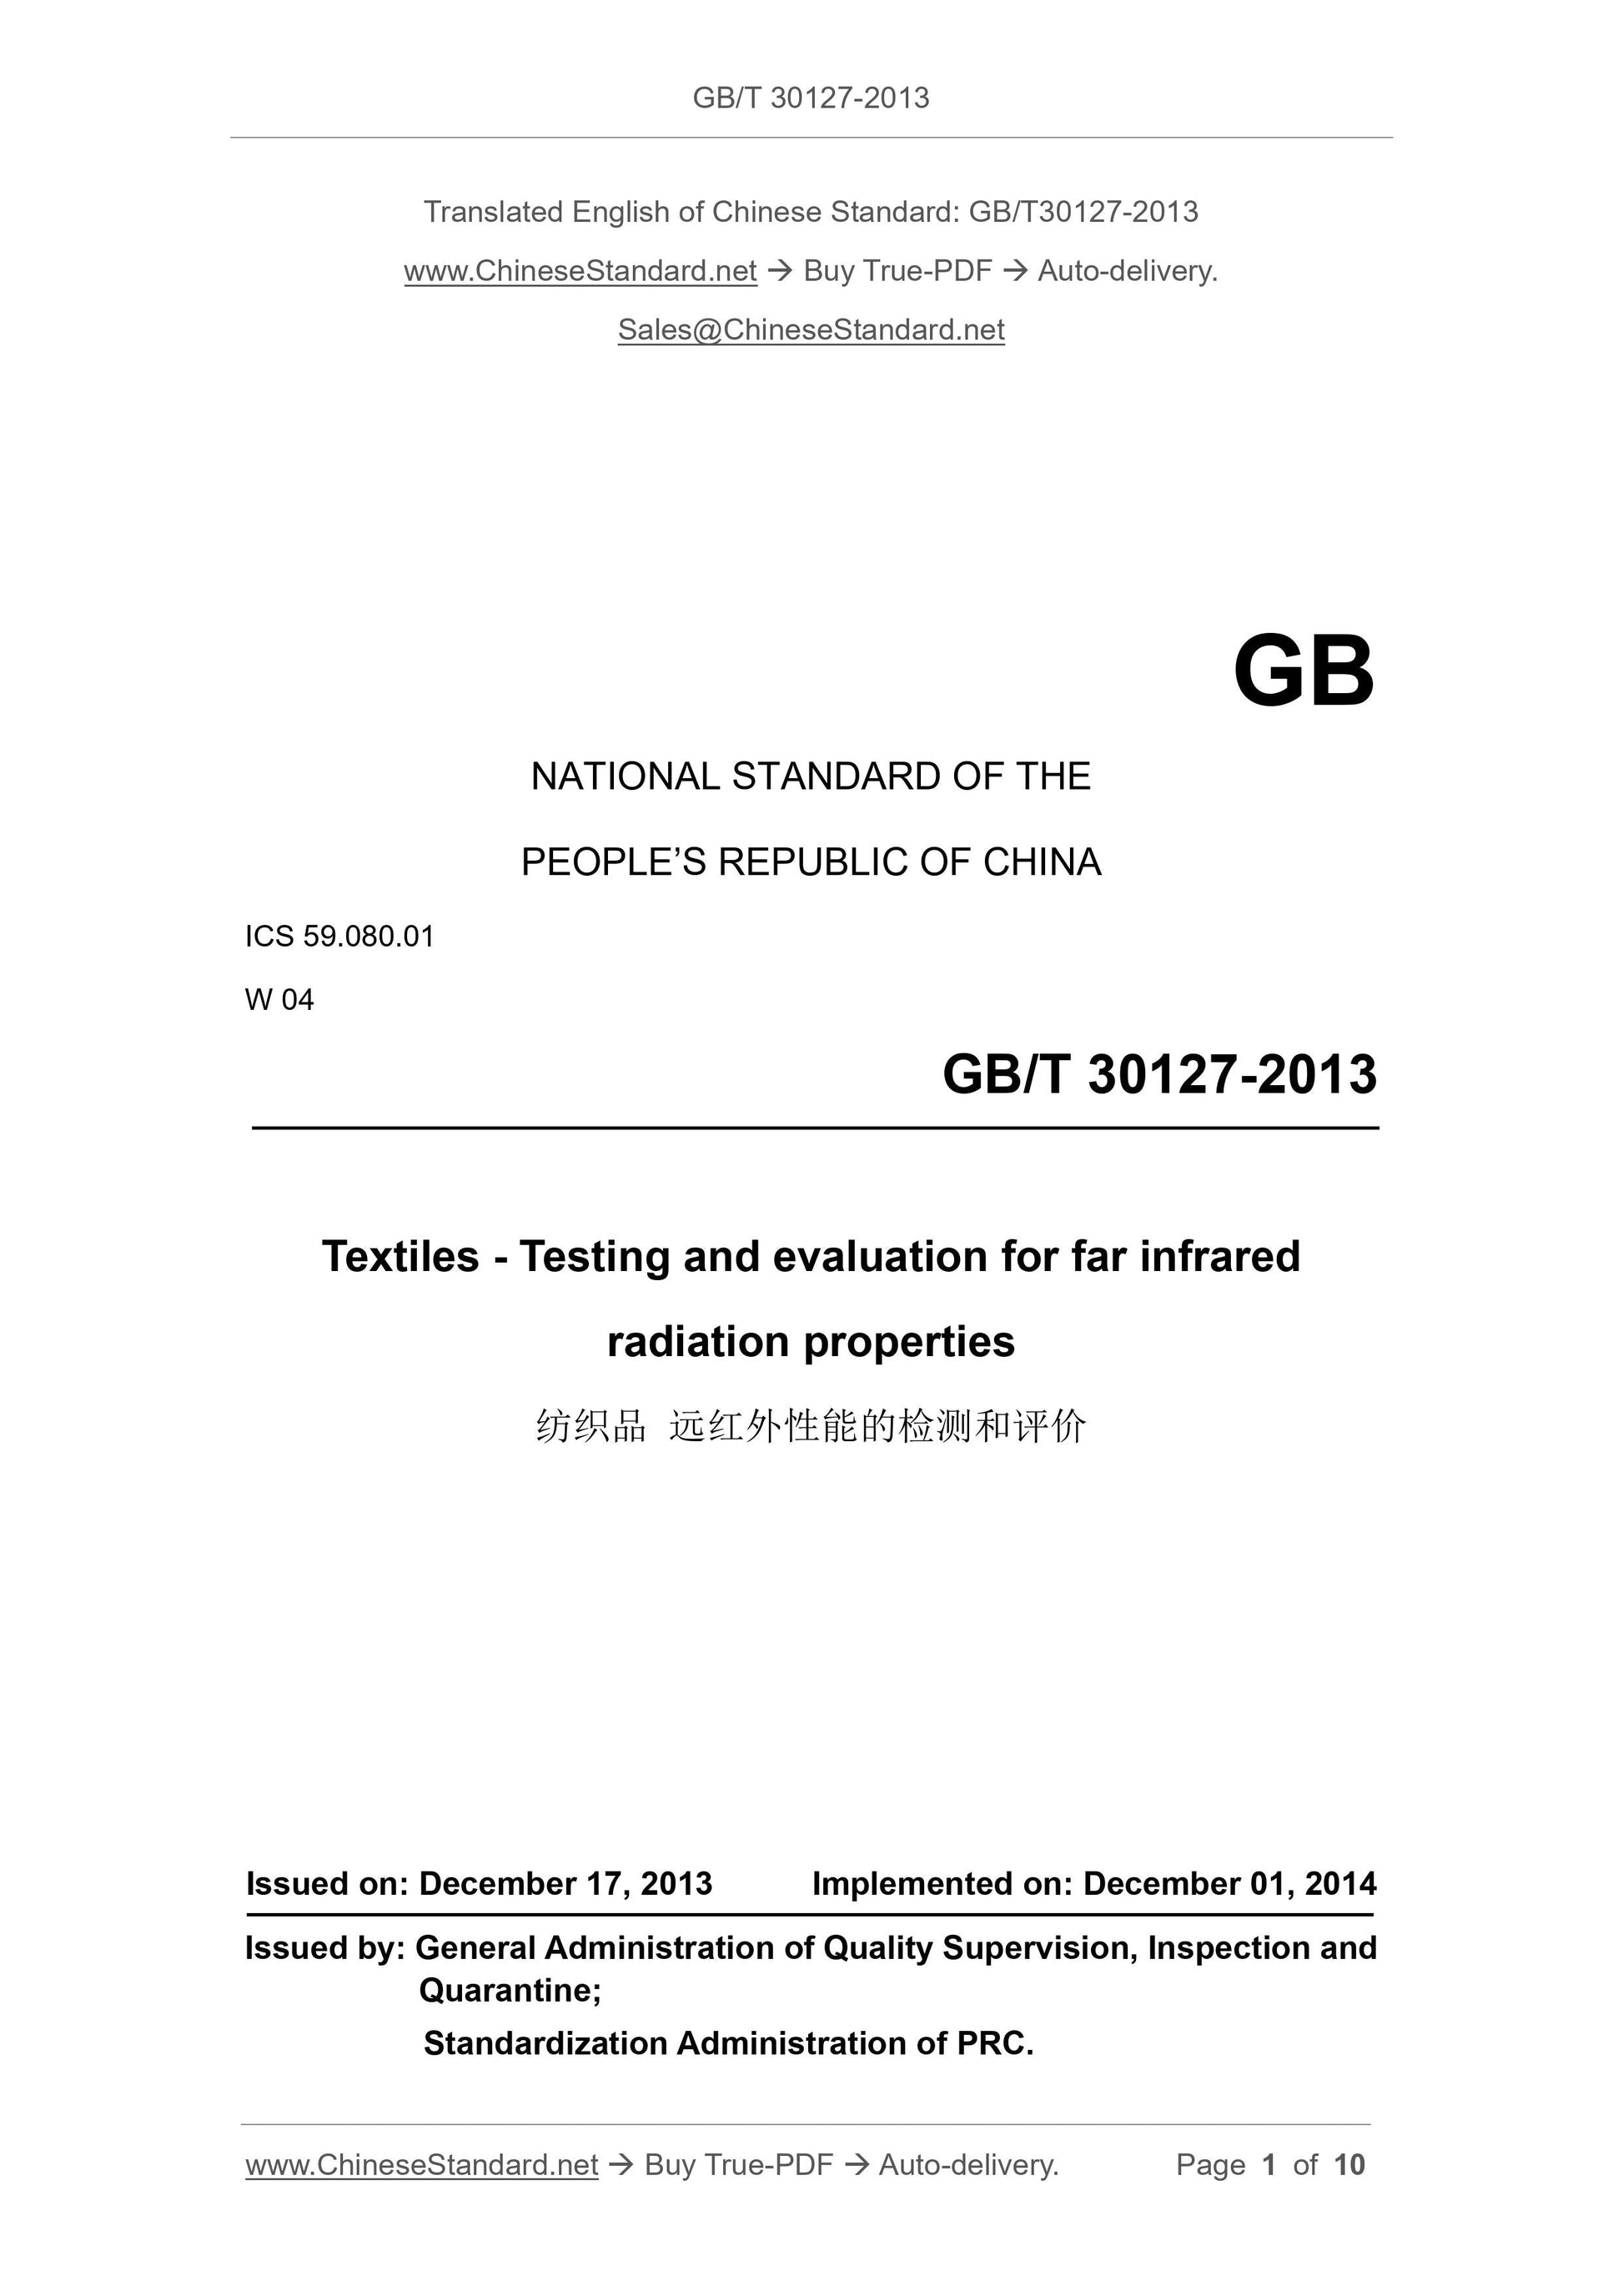 GB/T 30127-2013 Page 1